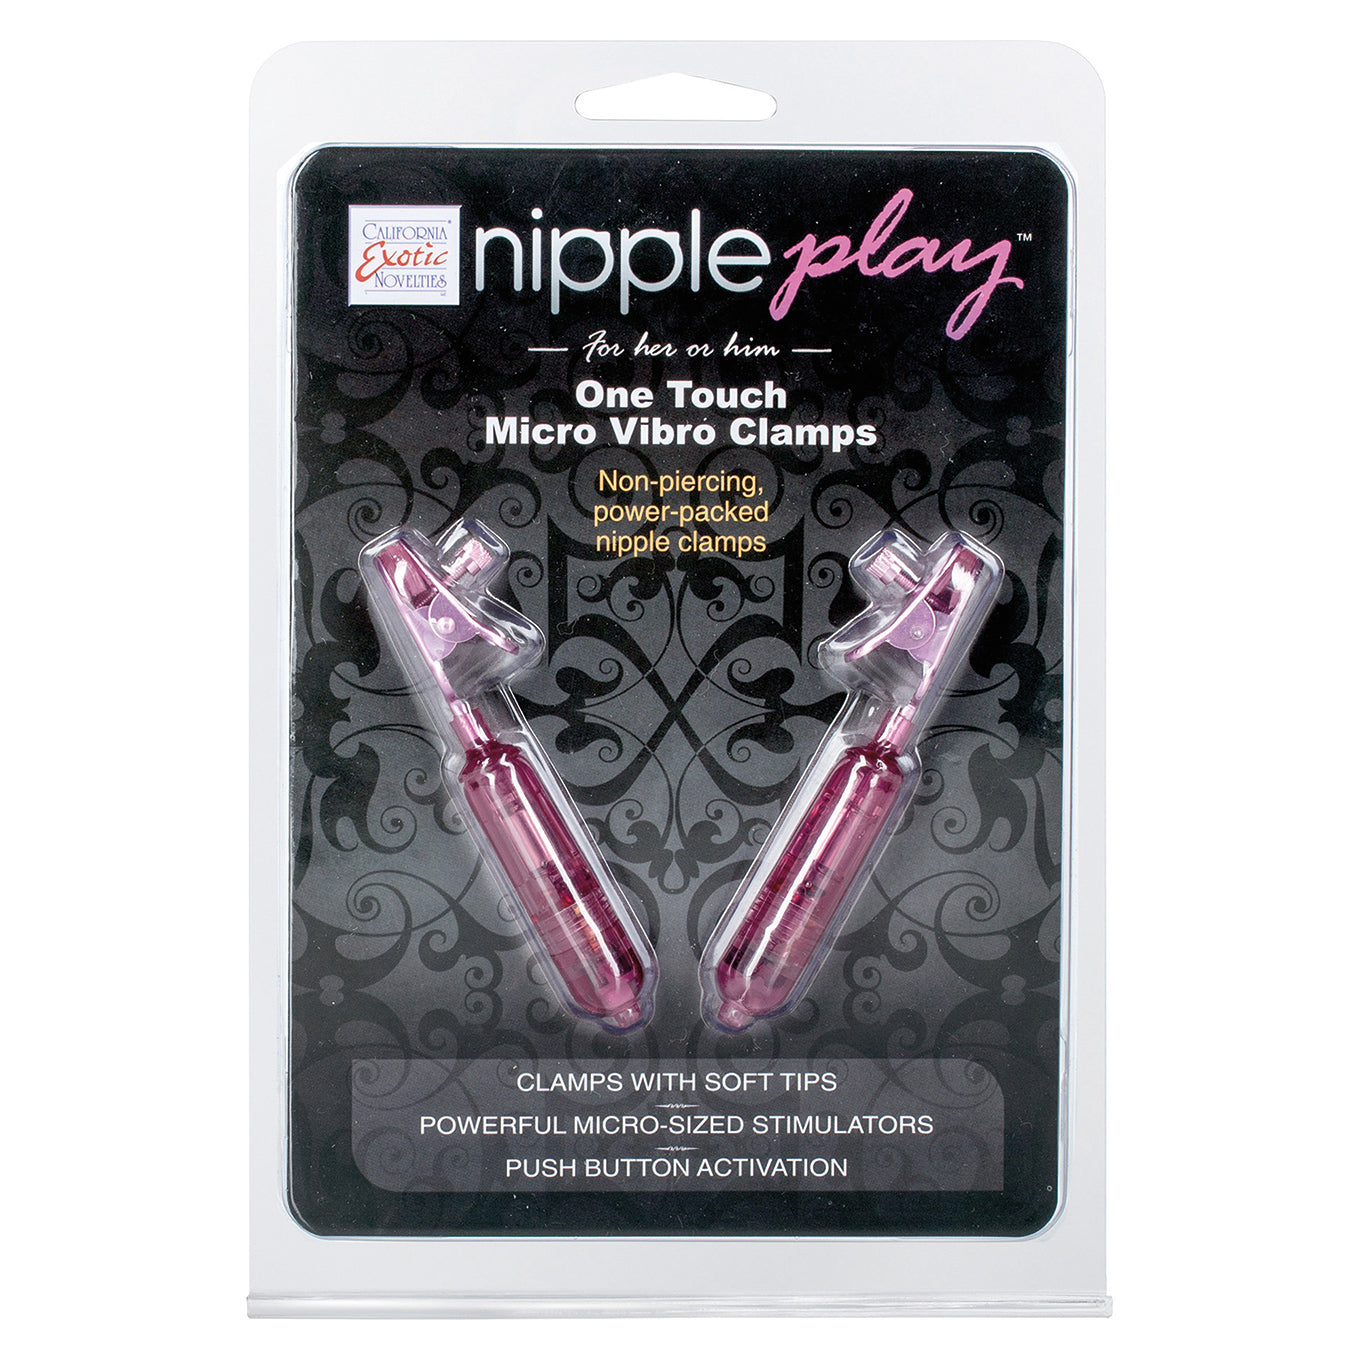 California Exotics - Nipple Play One Touch Micro Vibro Clamps Nipple Clamps (Vibration) Non Rechargeable Durio Asia